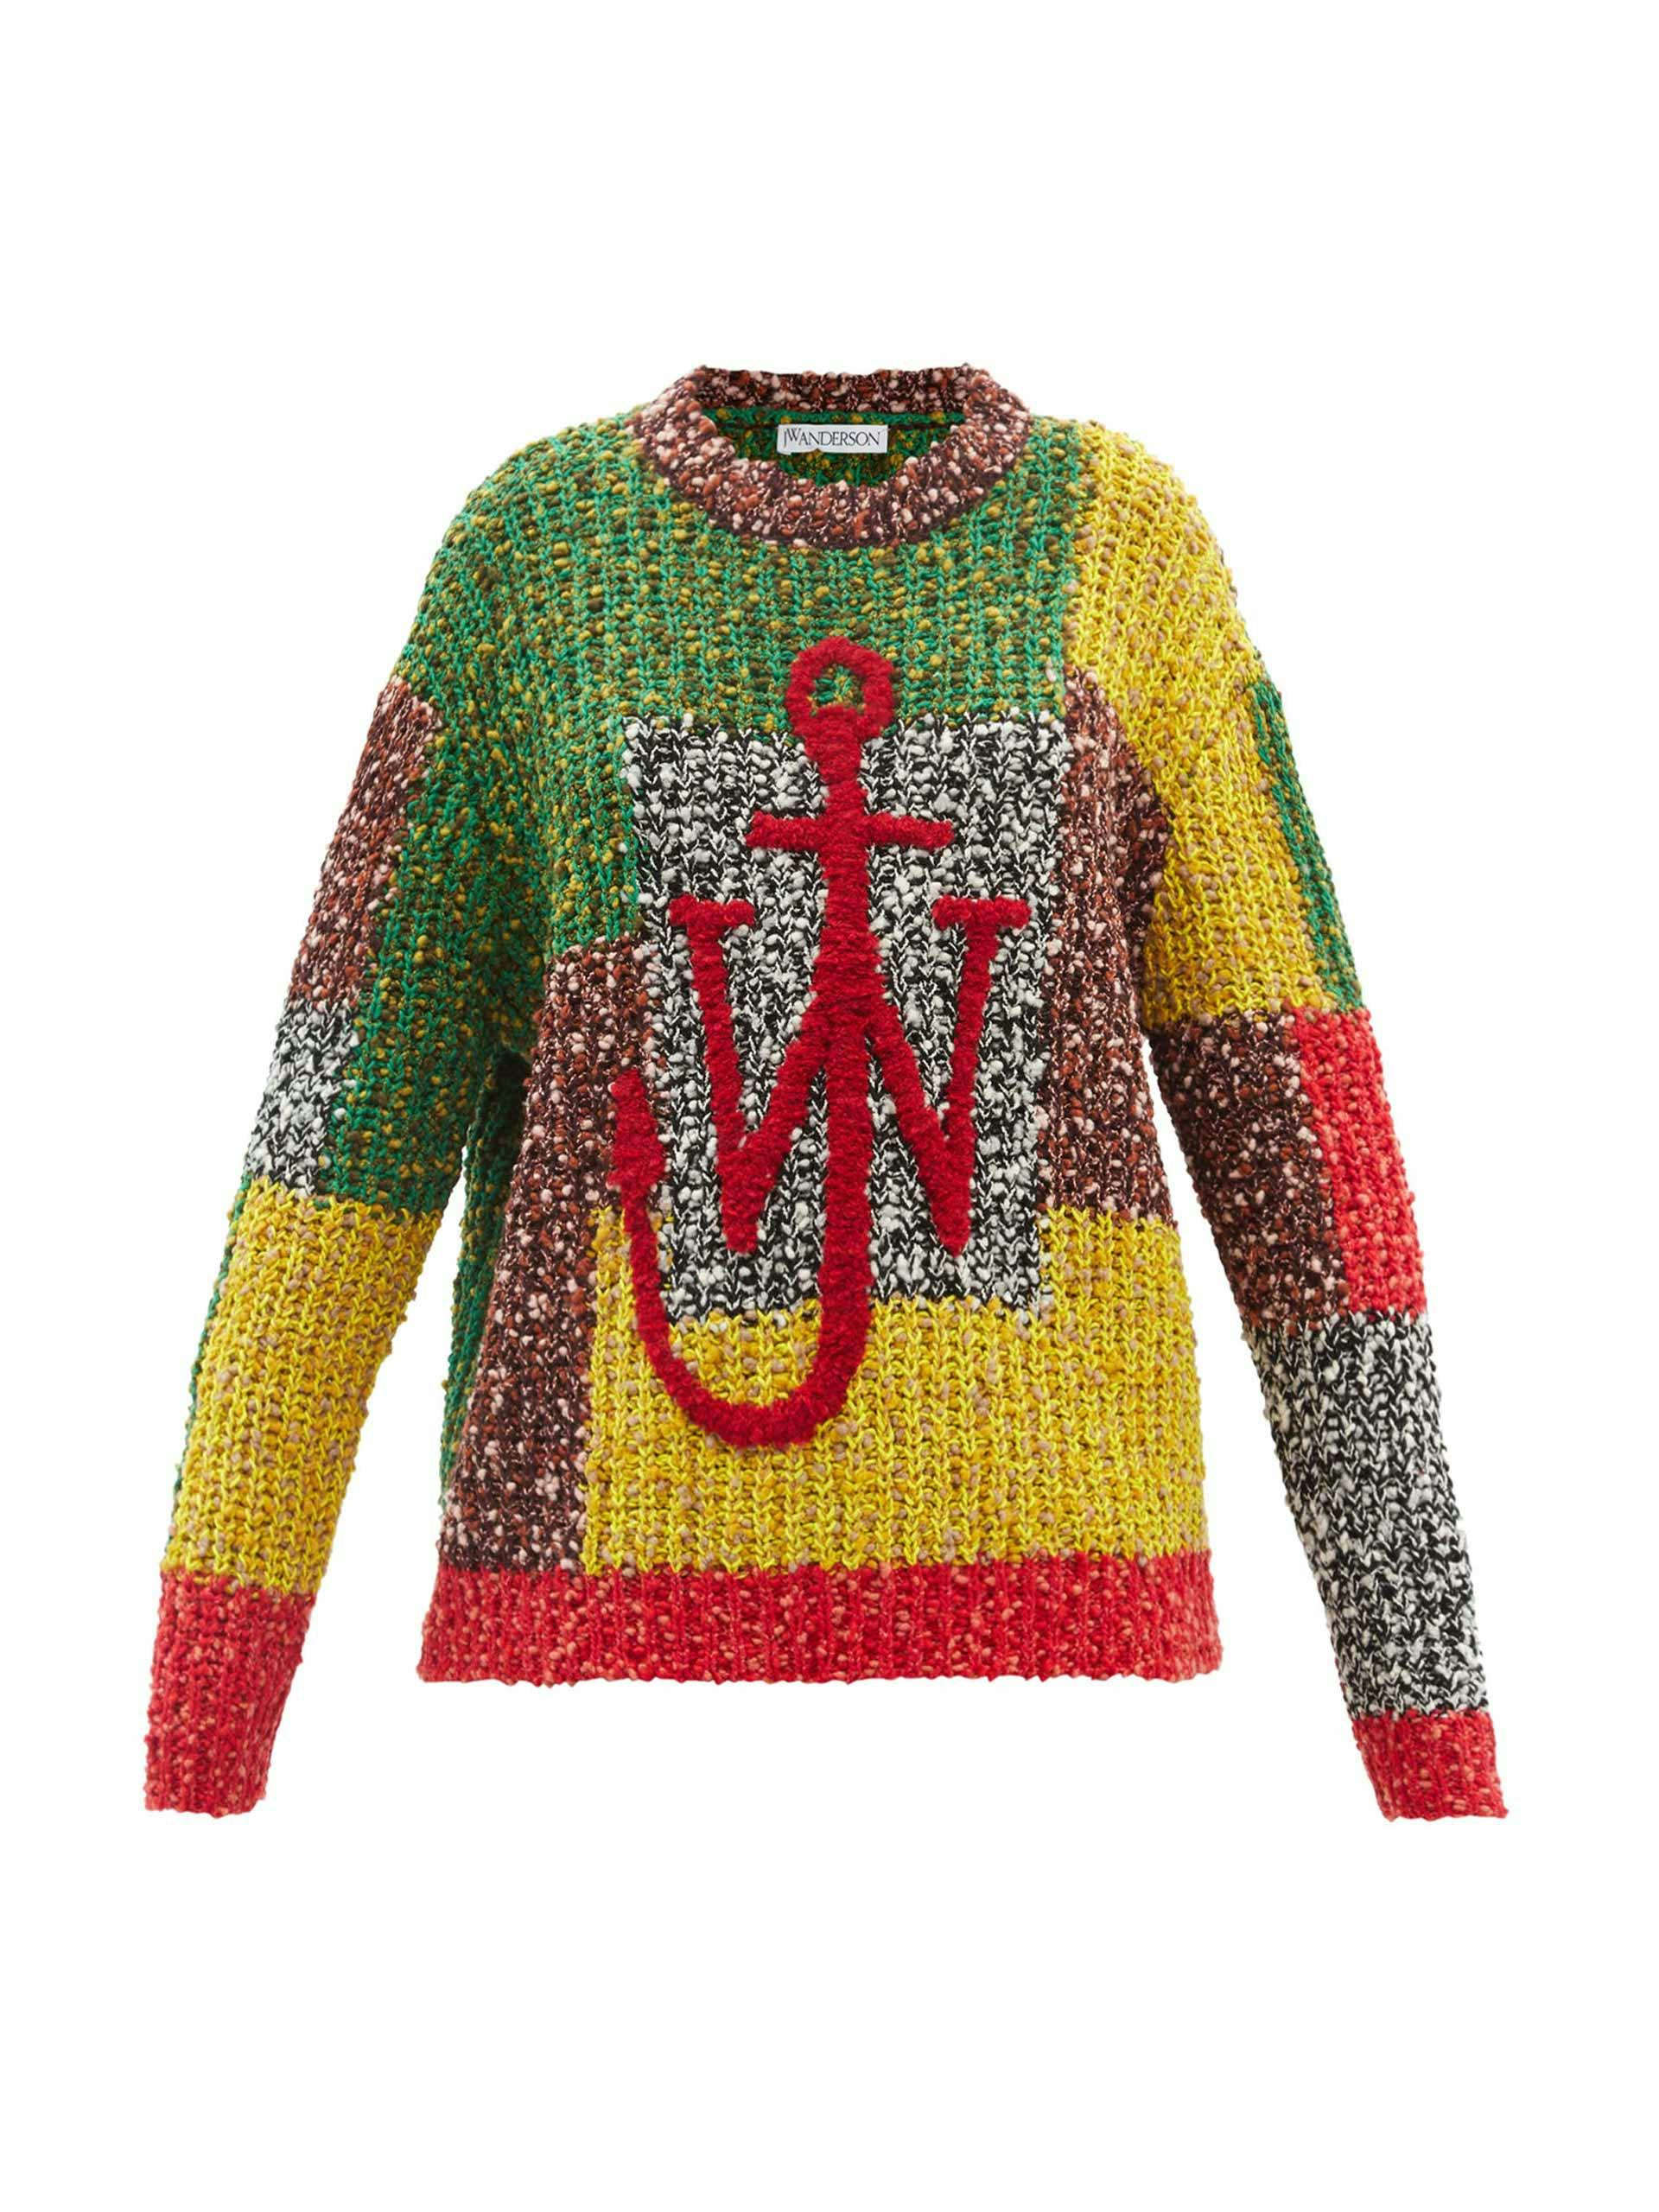 Anchor-logo patchwork sweater